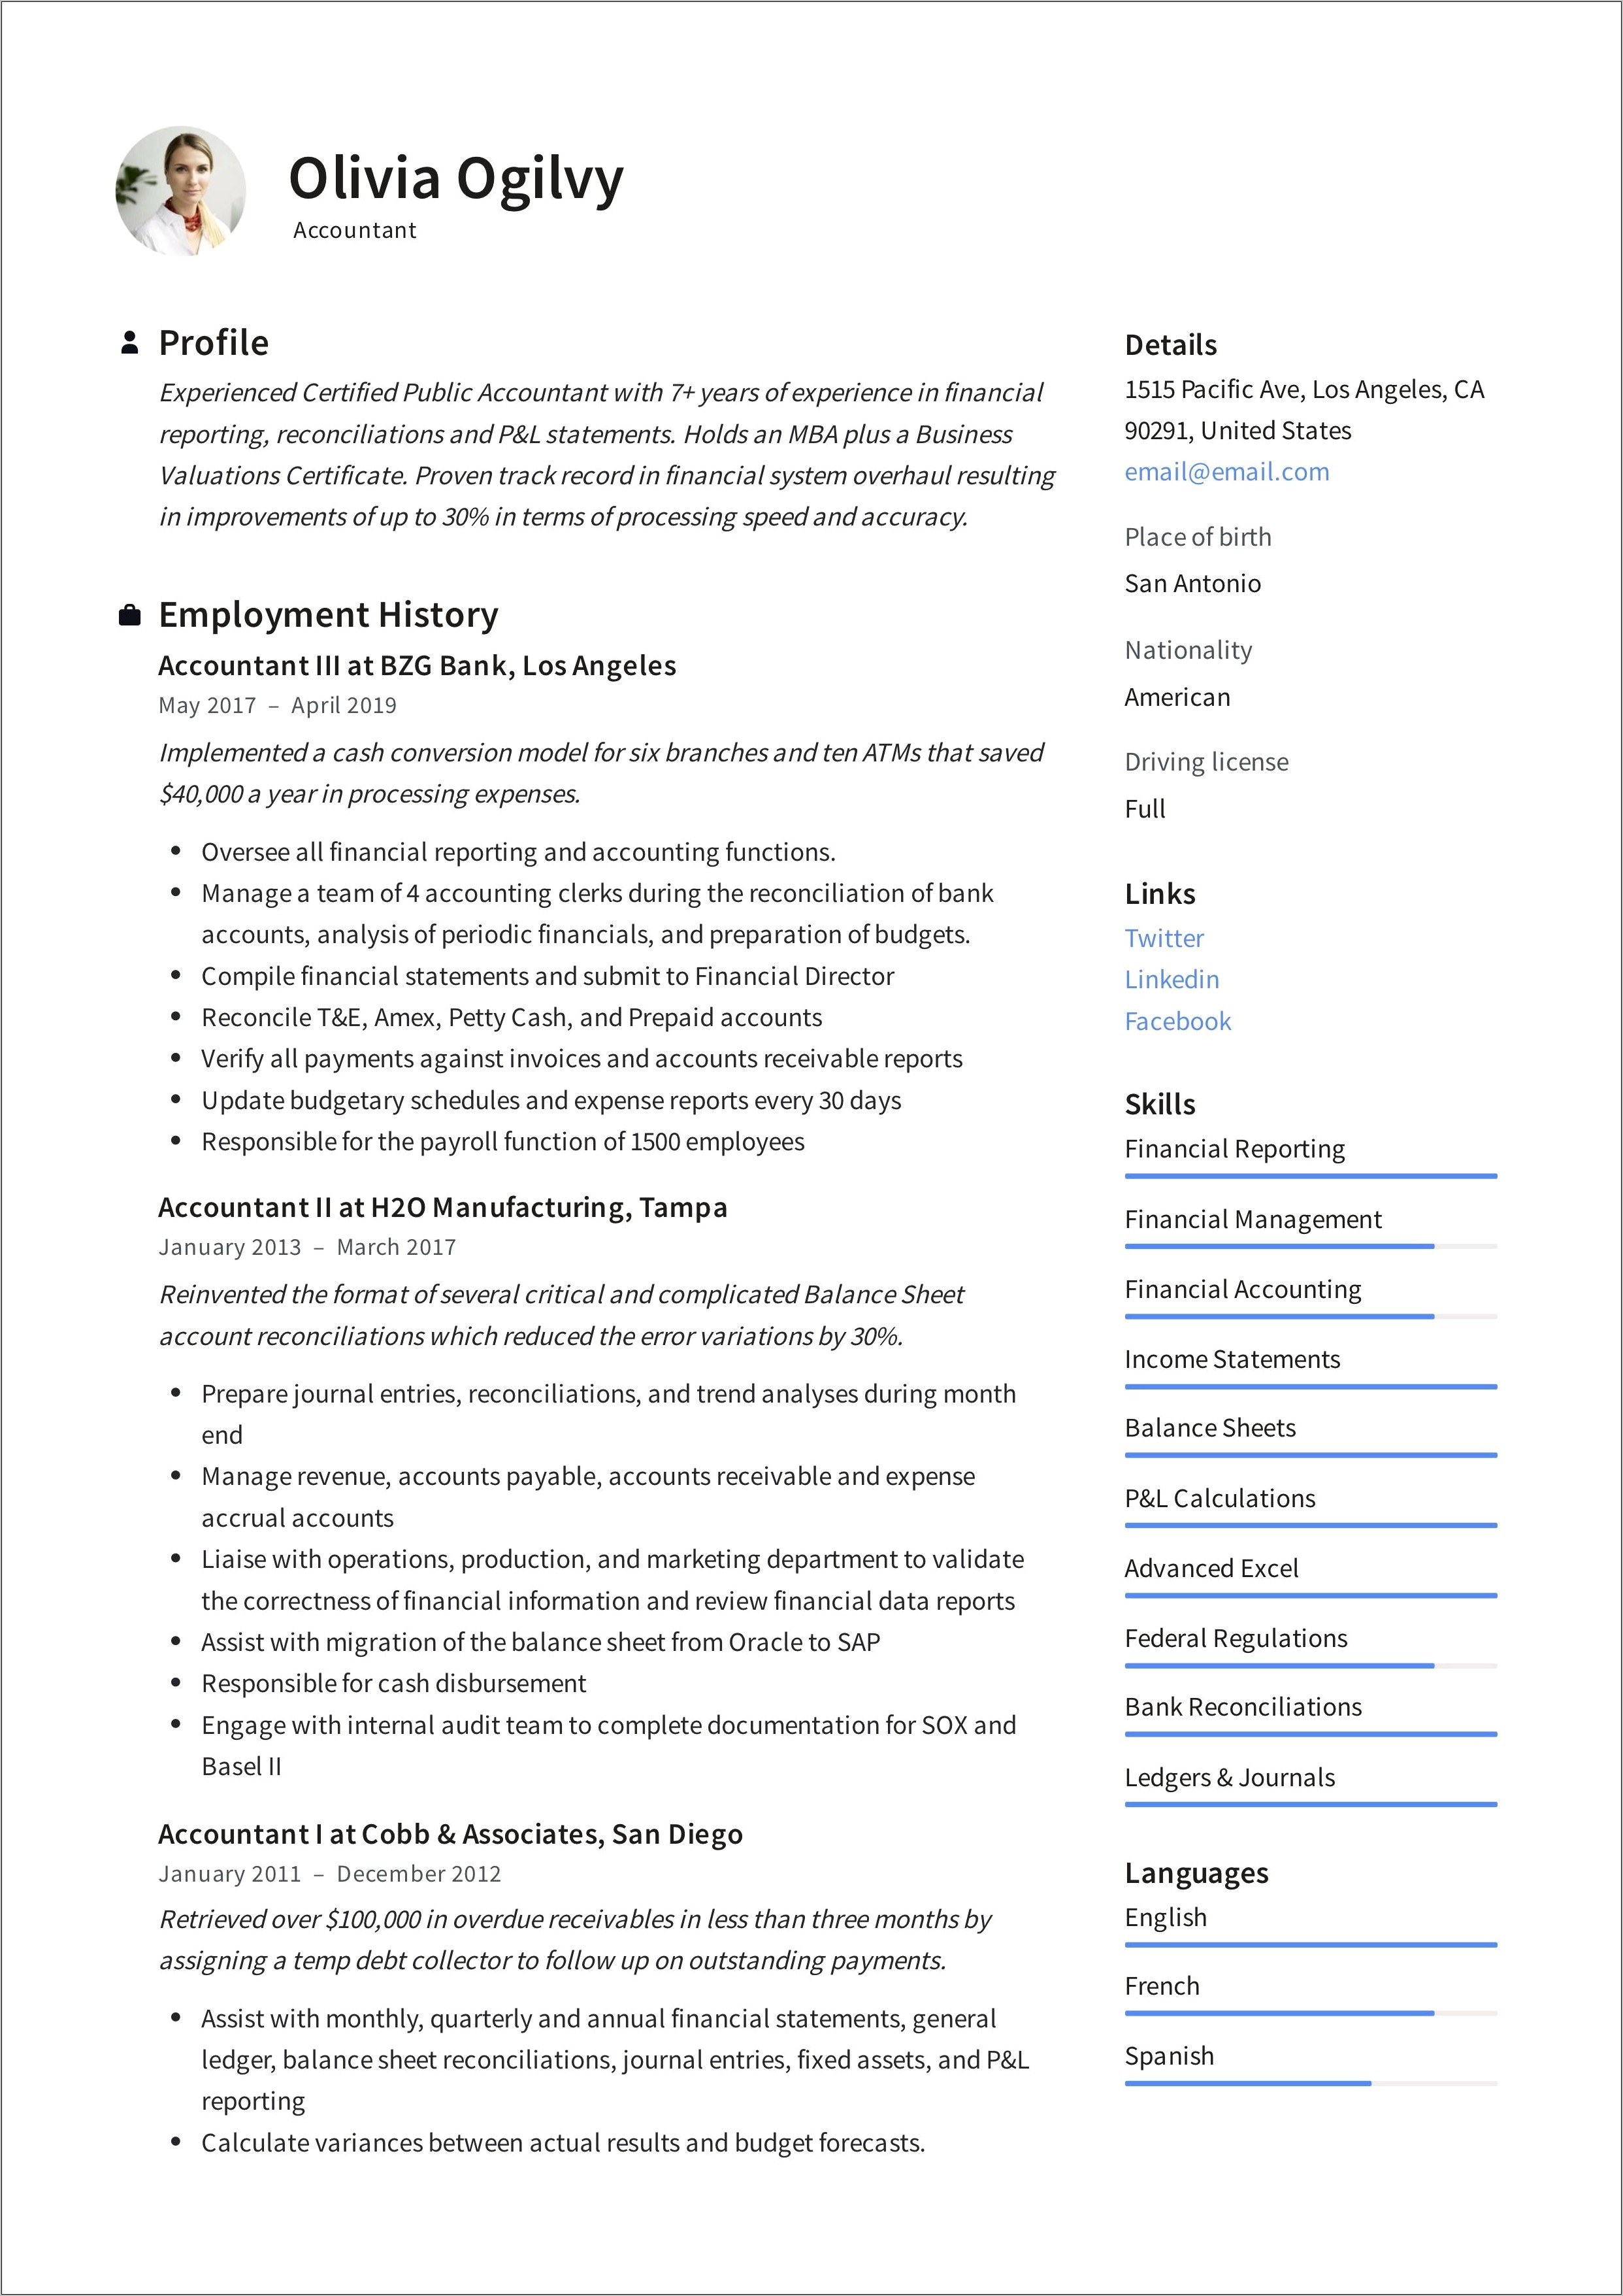 Best Format For Accounting Resume